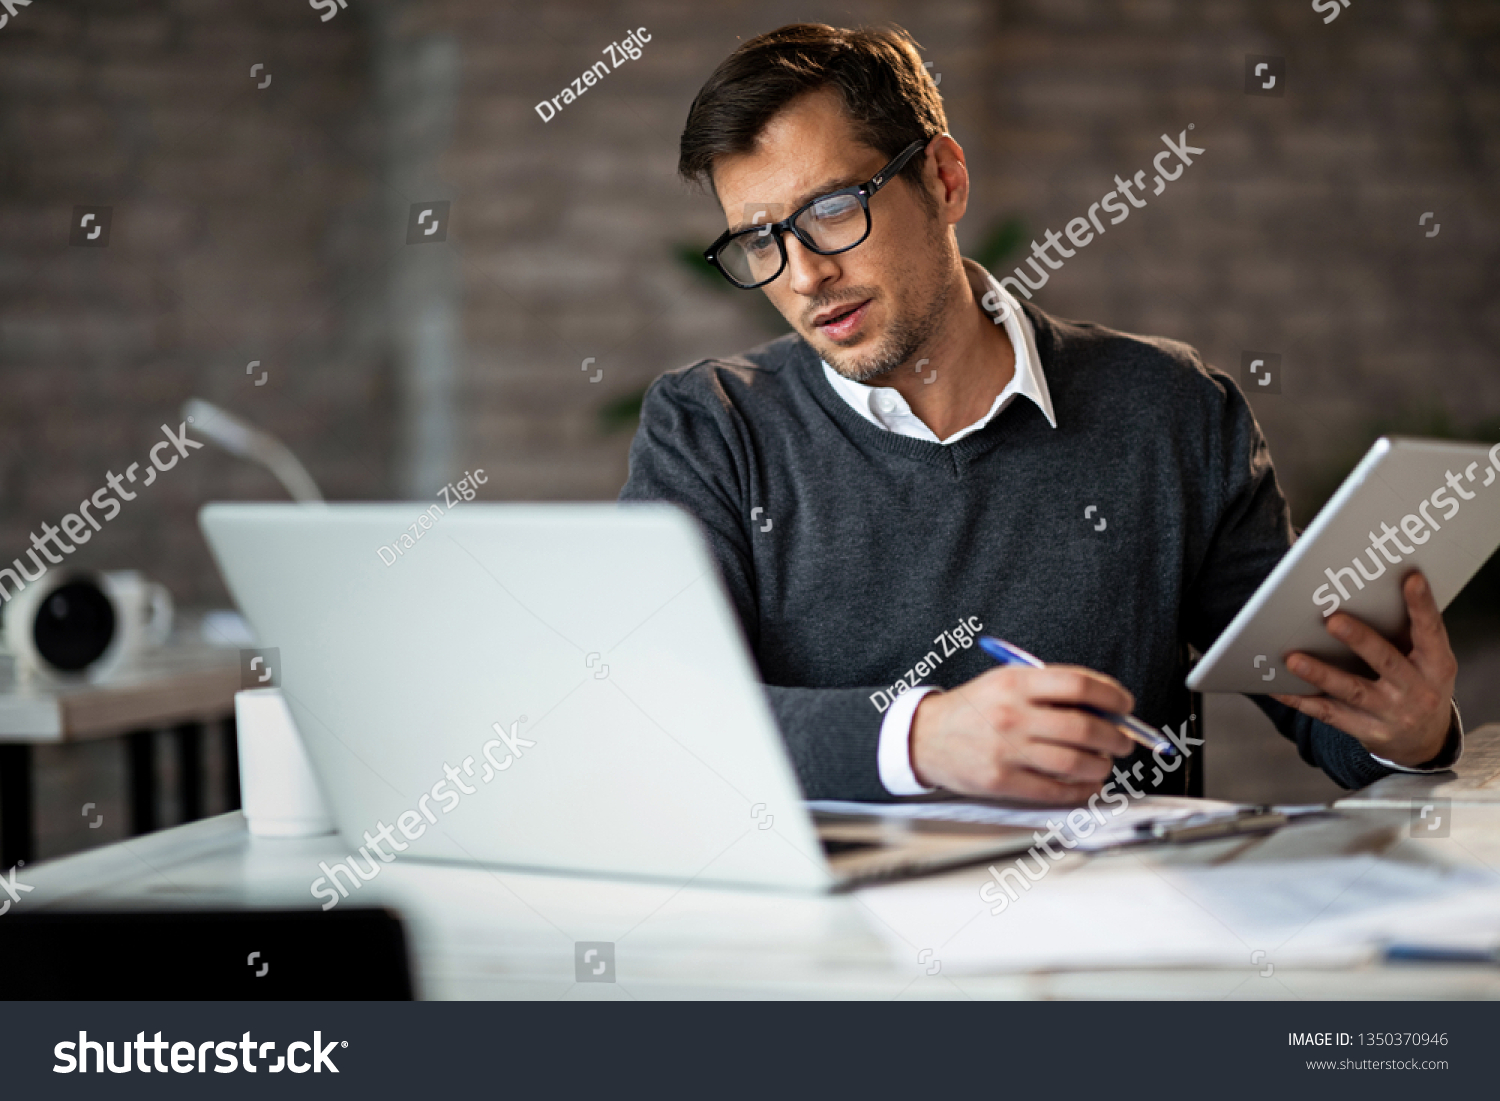 Multi-tasking businessman working in the office. He is using touchpad while reading an e-mail on laptop and taking notes on the paper. #1350370946